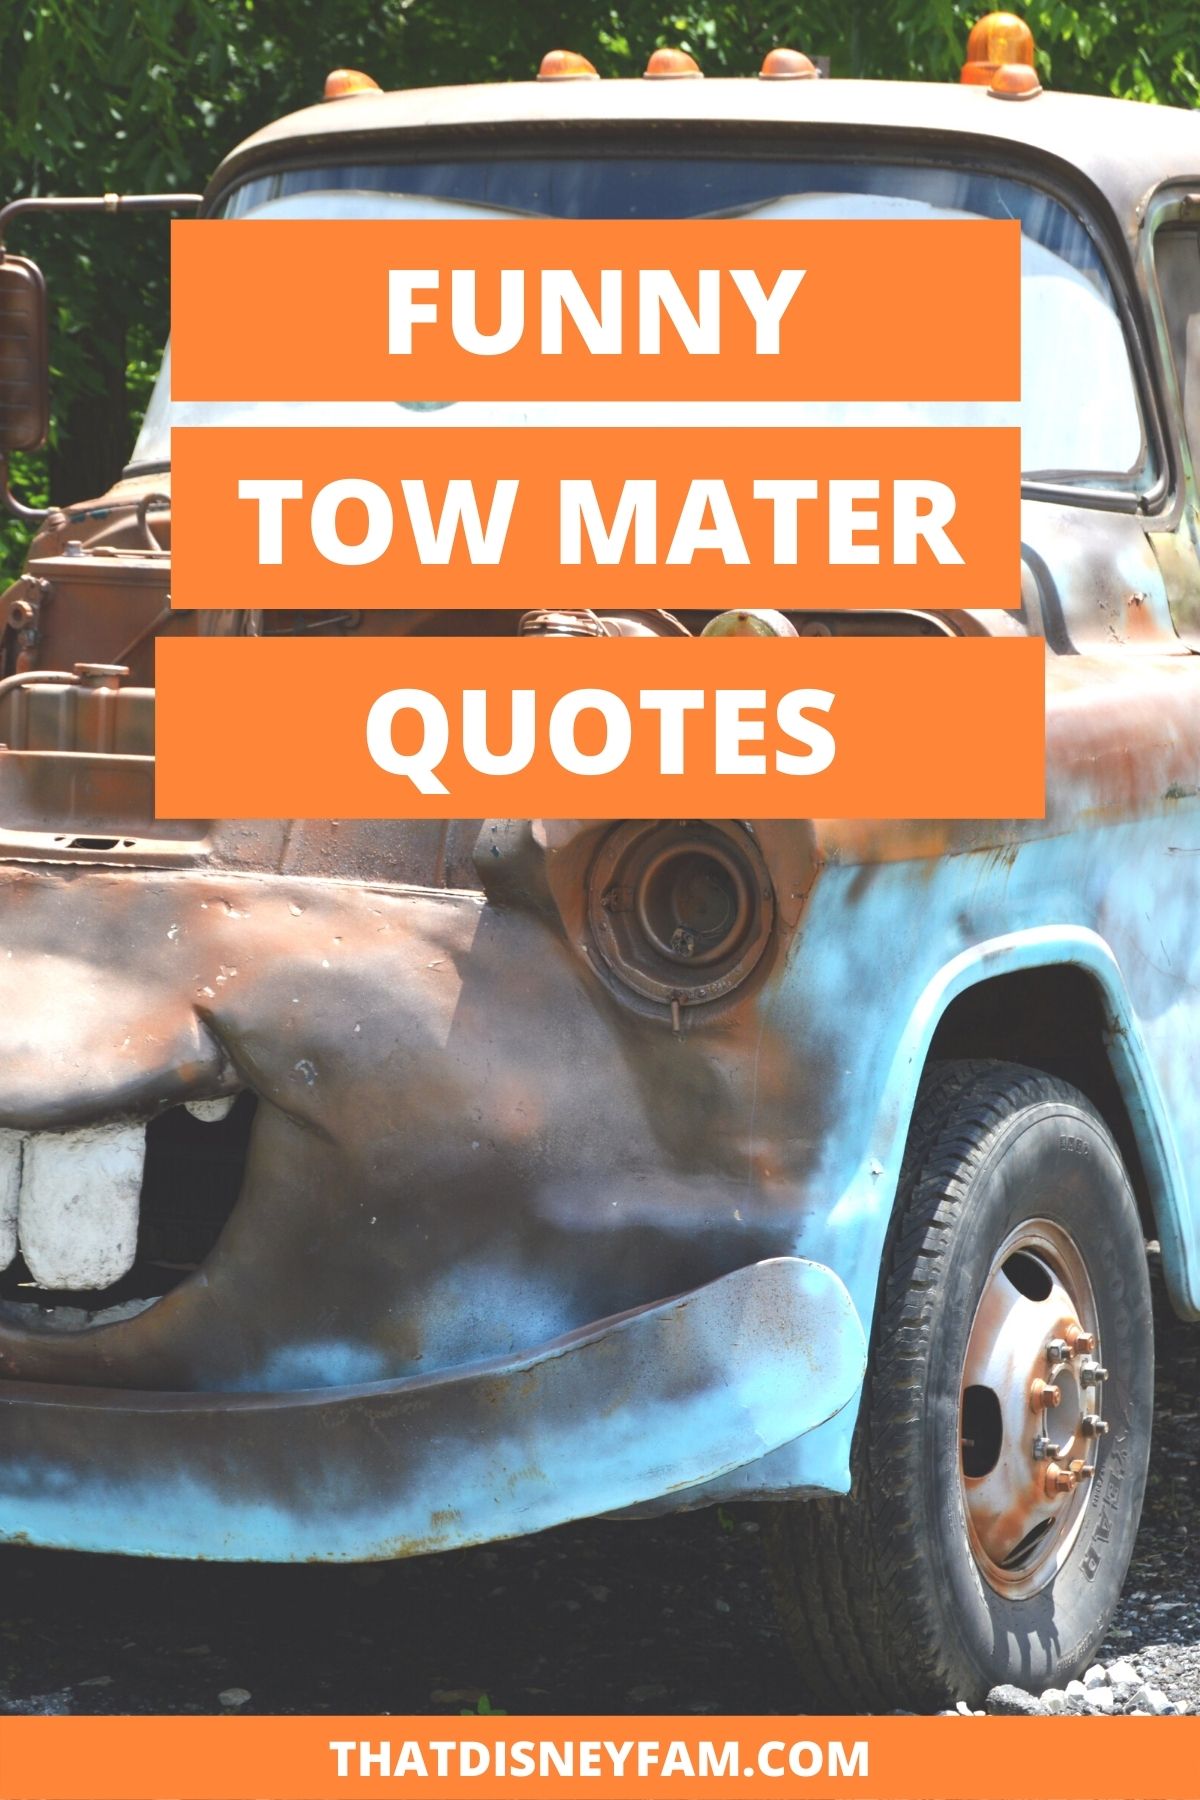 tow mater quotes